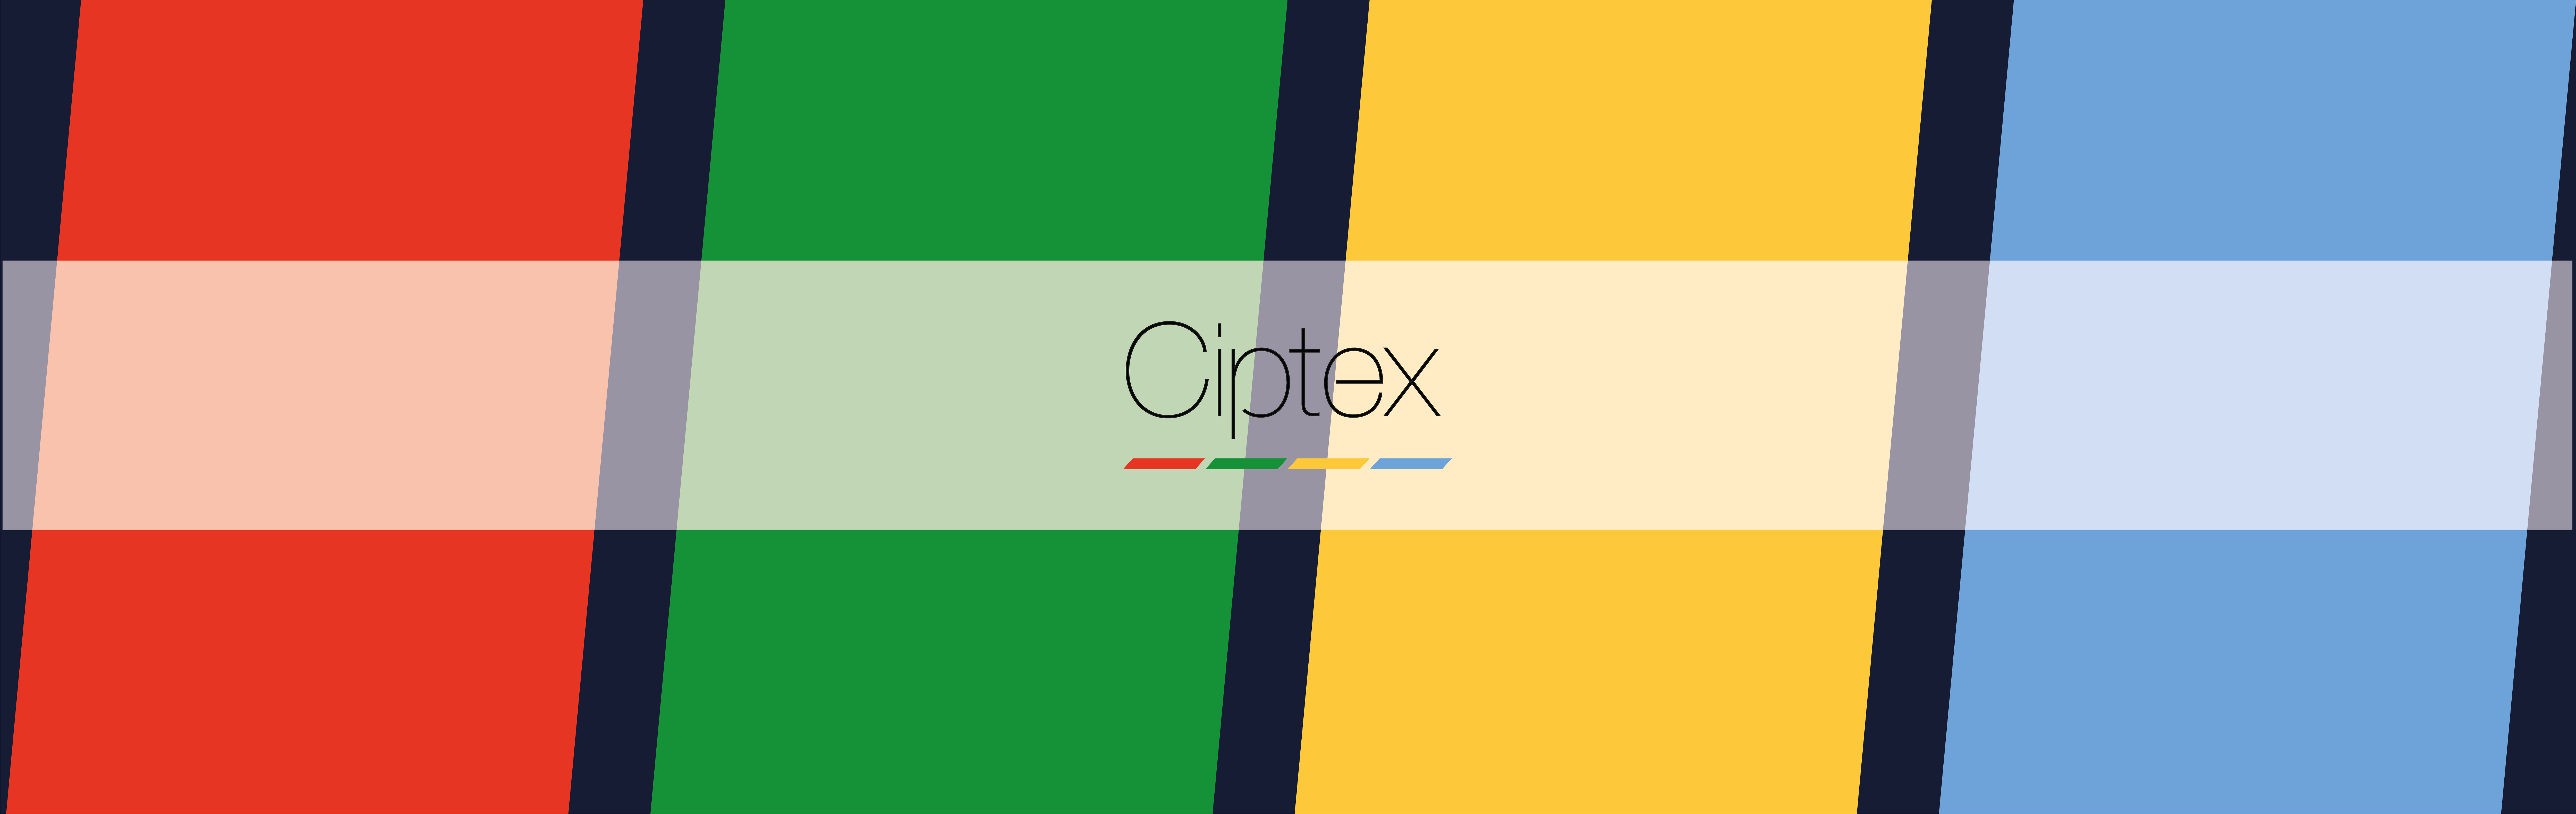 Ciptex about us background